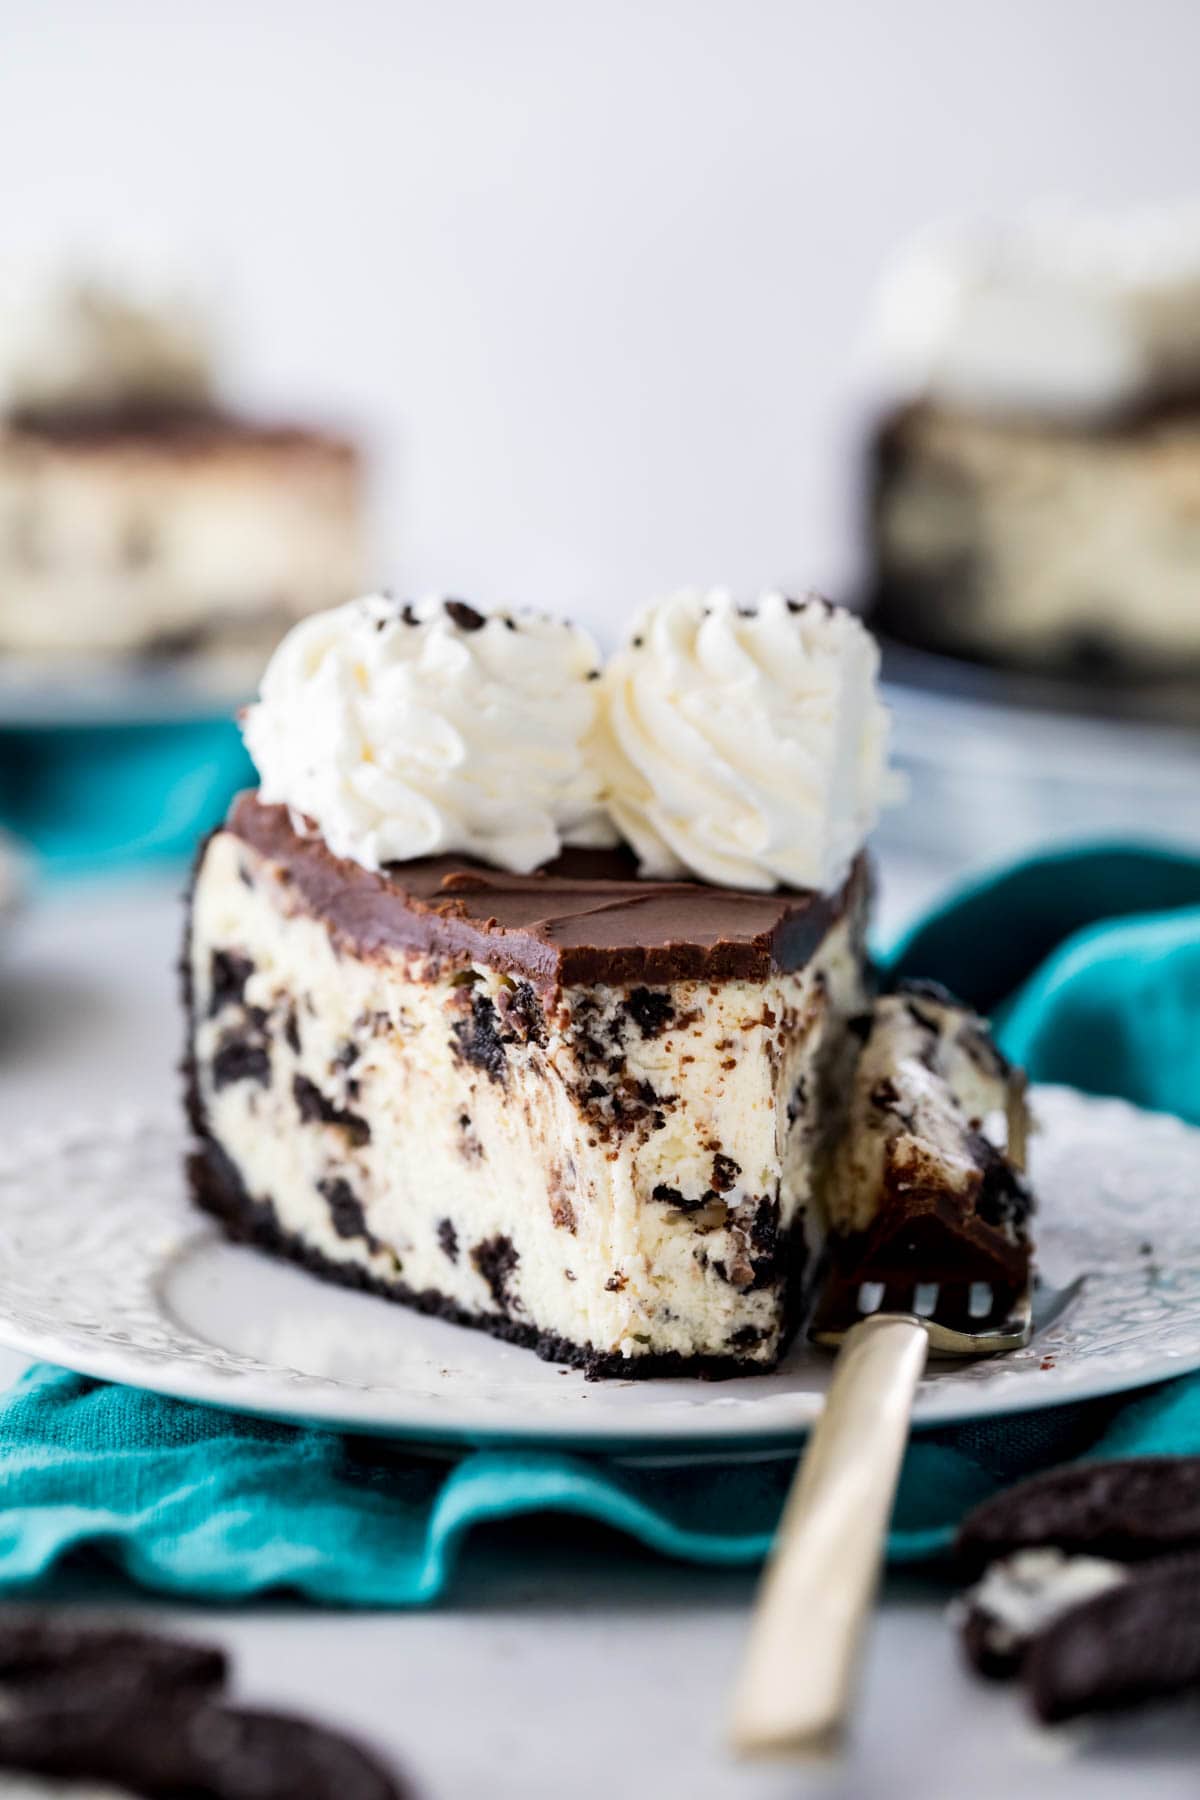 forkful missing from a slice of cheesecake with an oreo crust, crushed oreos in the batter, chocolate ganache top, and whipped cream